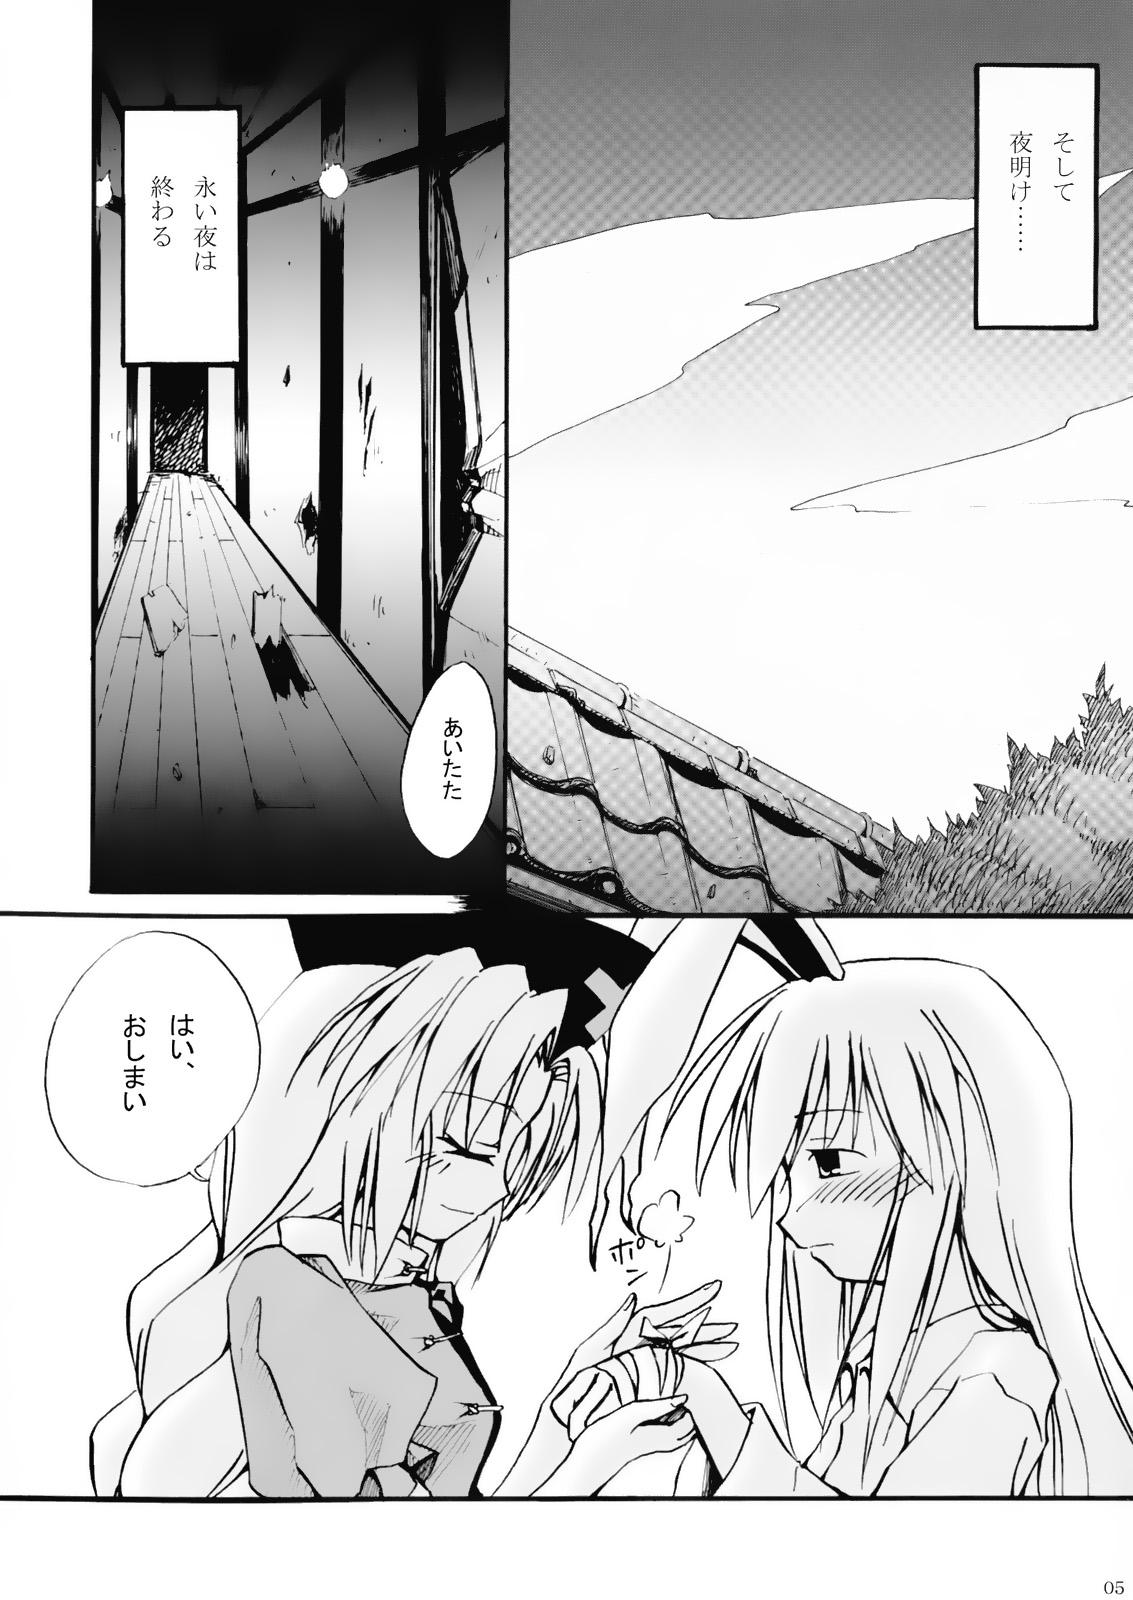 Family Roleplay 永夜 - Touhou project Newbie - Page 4